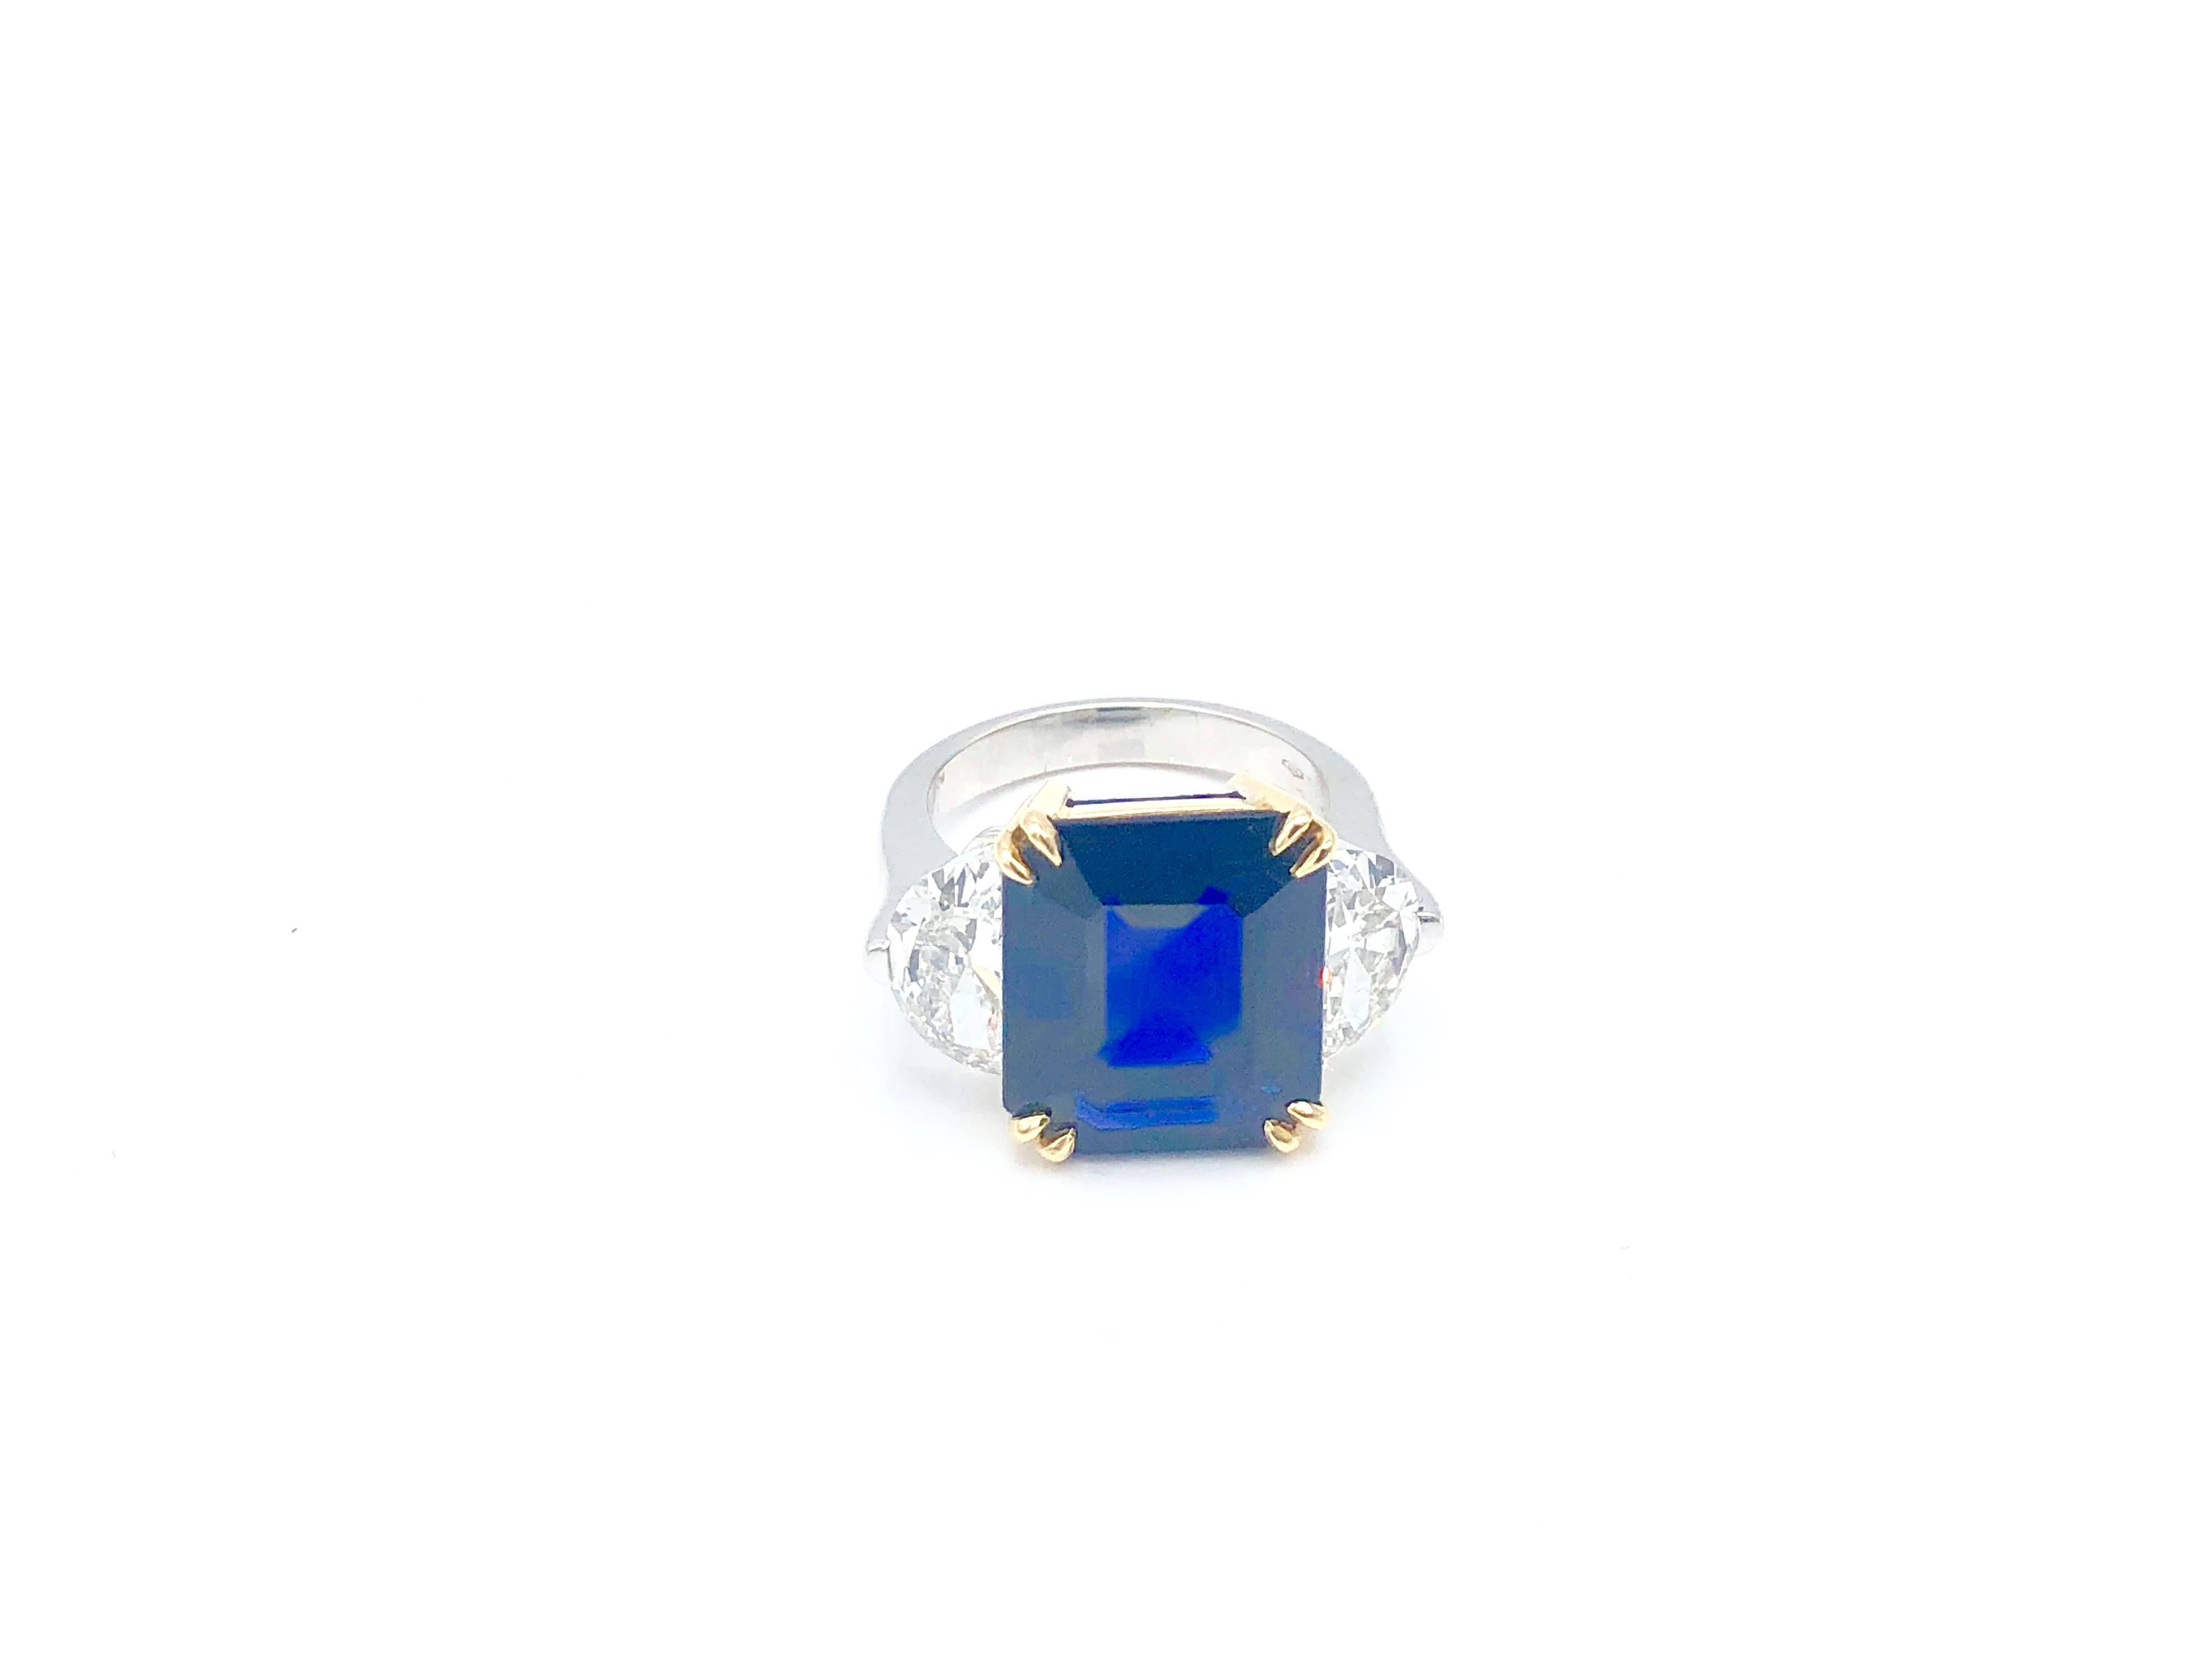 Cocktail ring featuring a beautiful emerald cut sapphire of 11,04 carats set between two trillion cut diamonds for a total weight of 3.20 carats.

Report: SSEF East Africa No Heat